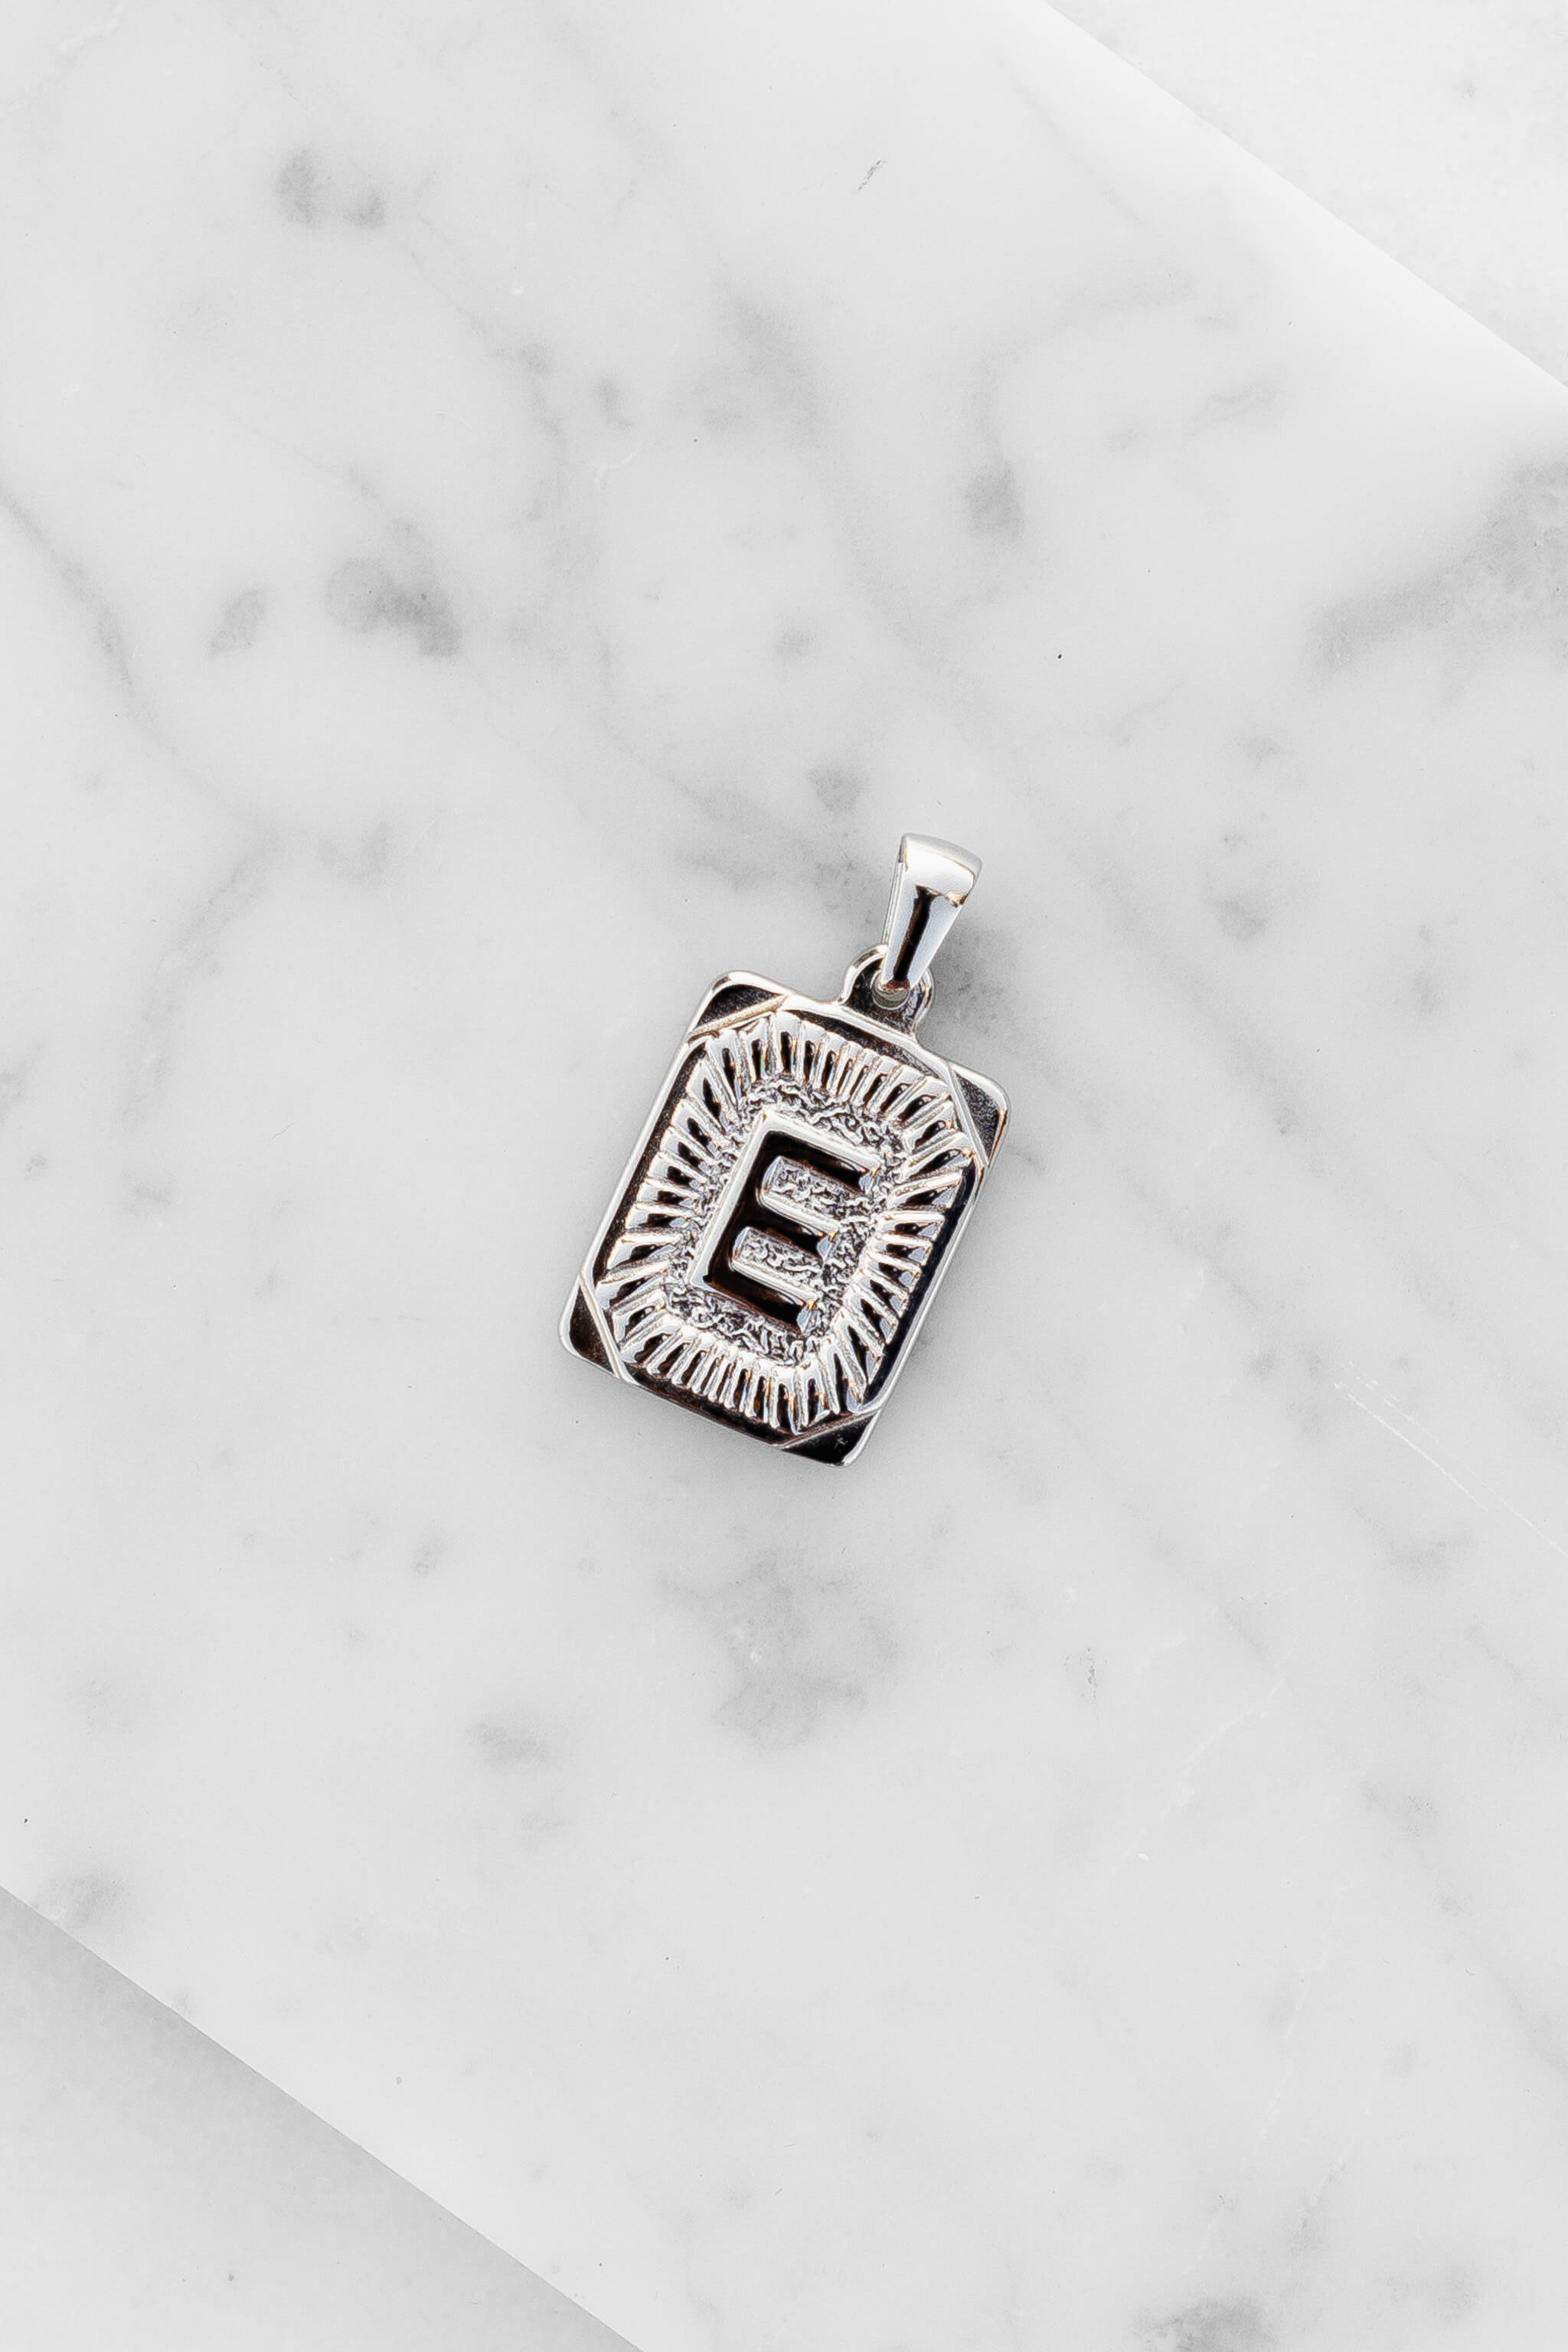 Silver Monogram Letter "E" Charm laying on a marble